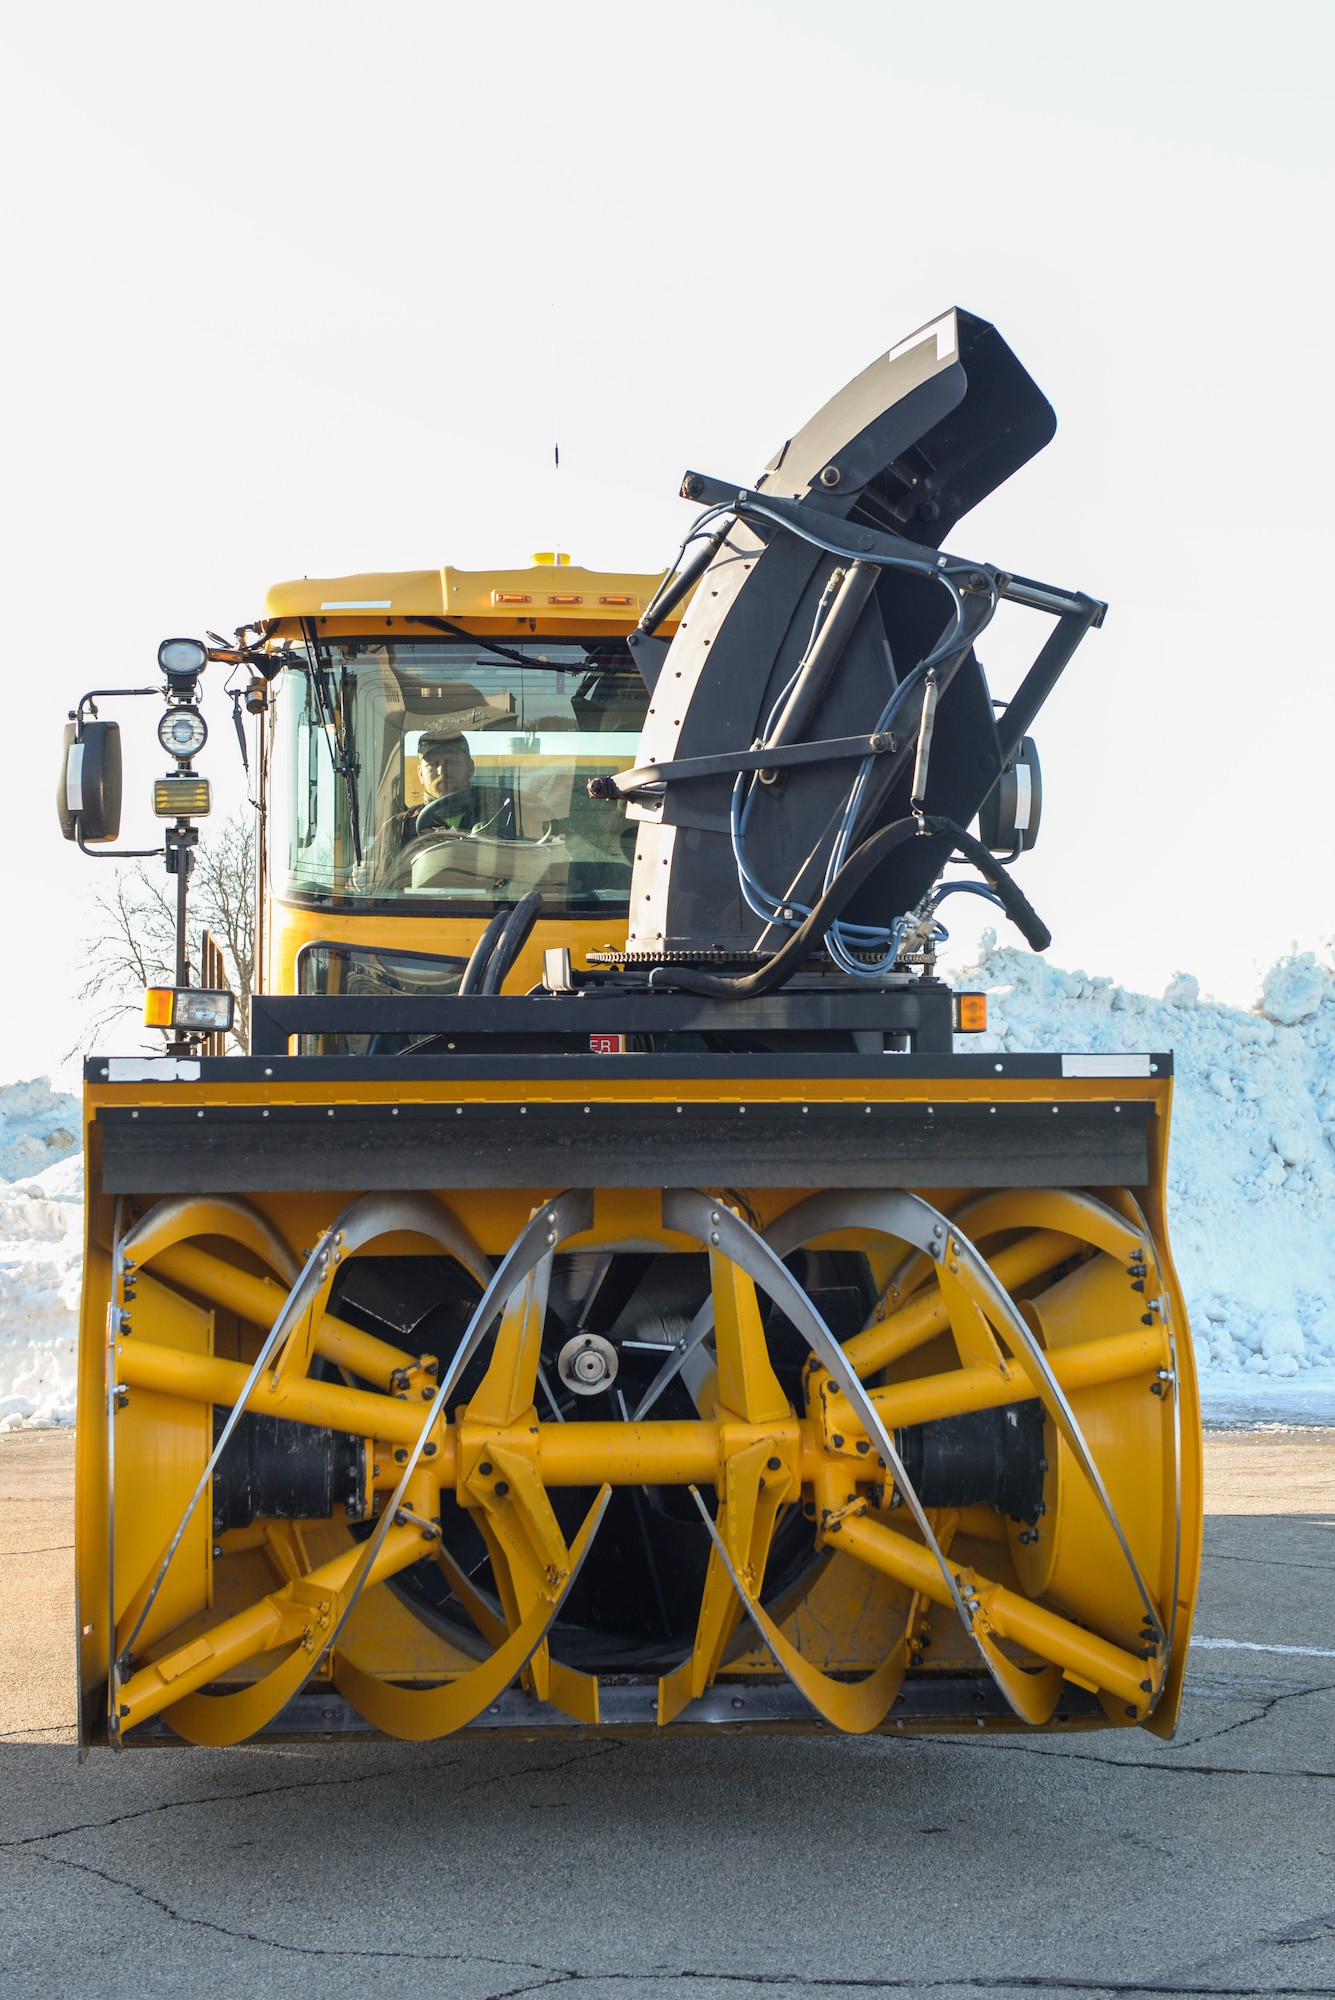 A snow blower belonging to the 88th Civil Engineer Squadron snow removal team sits parked and ready on the airfield of Wright-Patterson Air Force Base, Ohio, Feb. 23, 2020. From November to April the team runs 24-hour operations with as many as 30 pieces of equipment to ensure the mission of Wright-Patt can continue. (U.S. Air Force photo by Wesley Farnsworth)